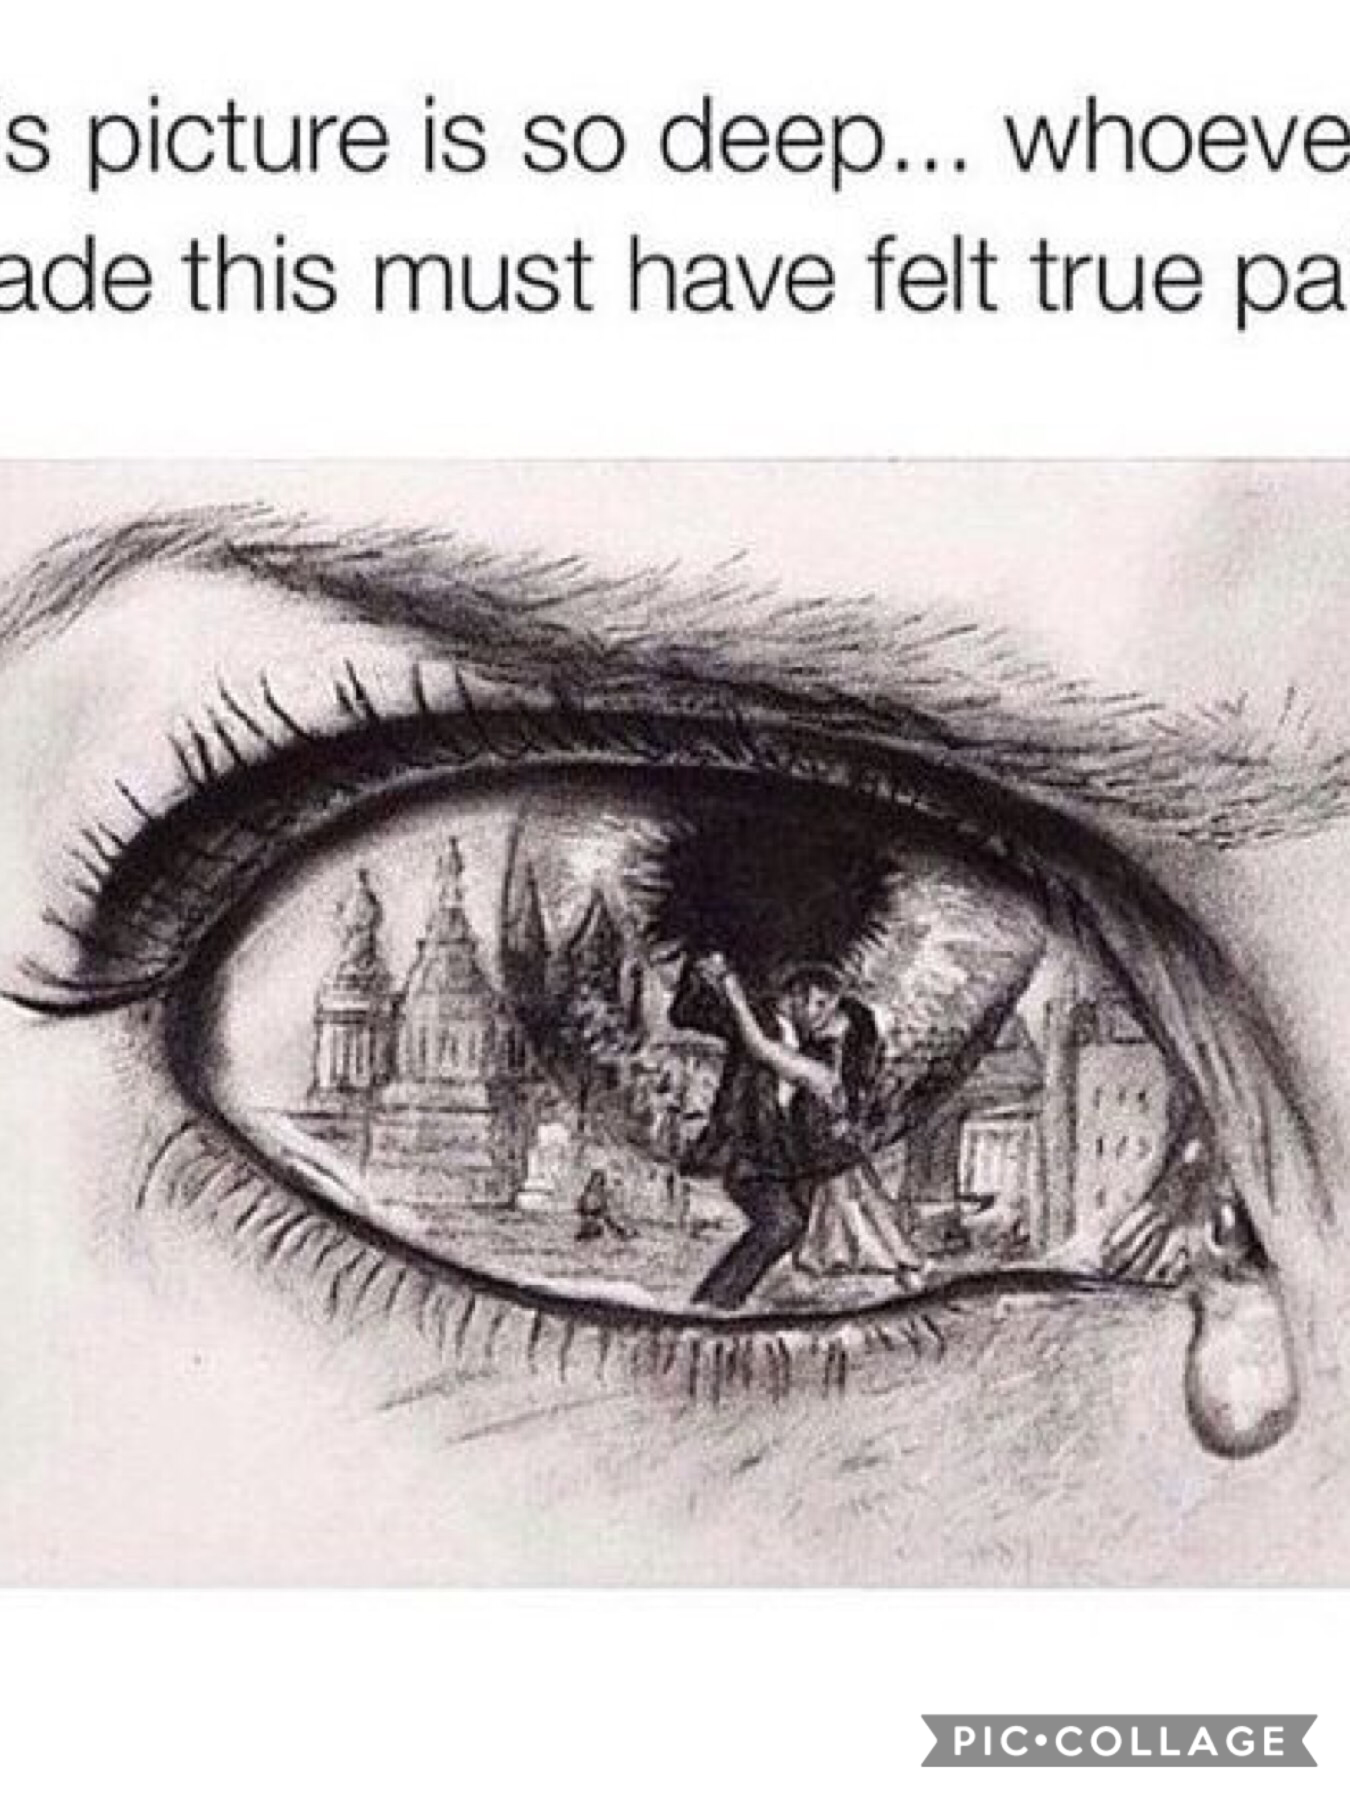 This picture is so deep whoever made this must have felt true pain 😢